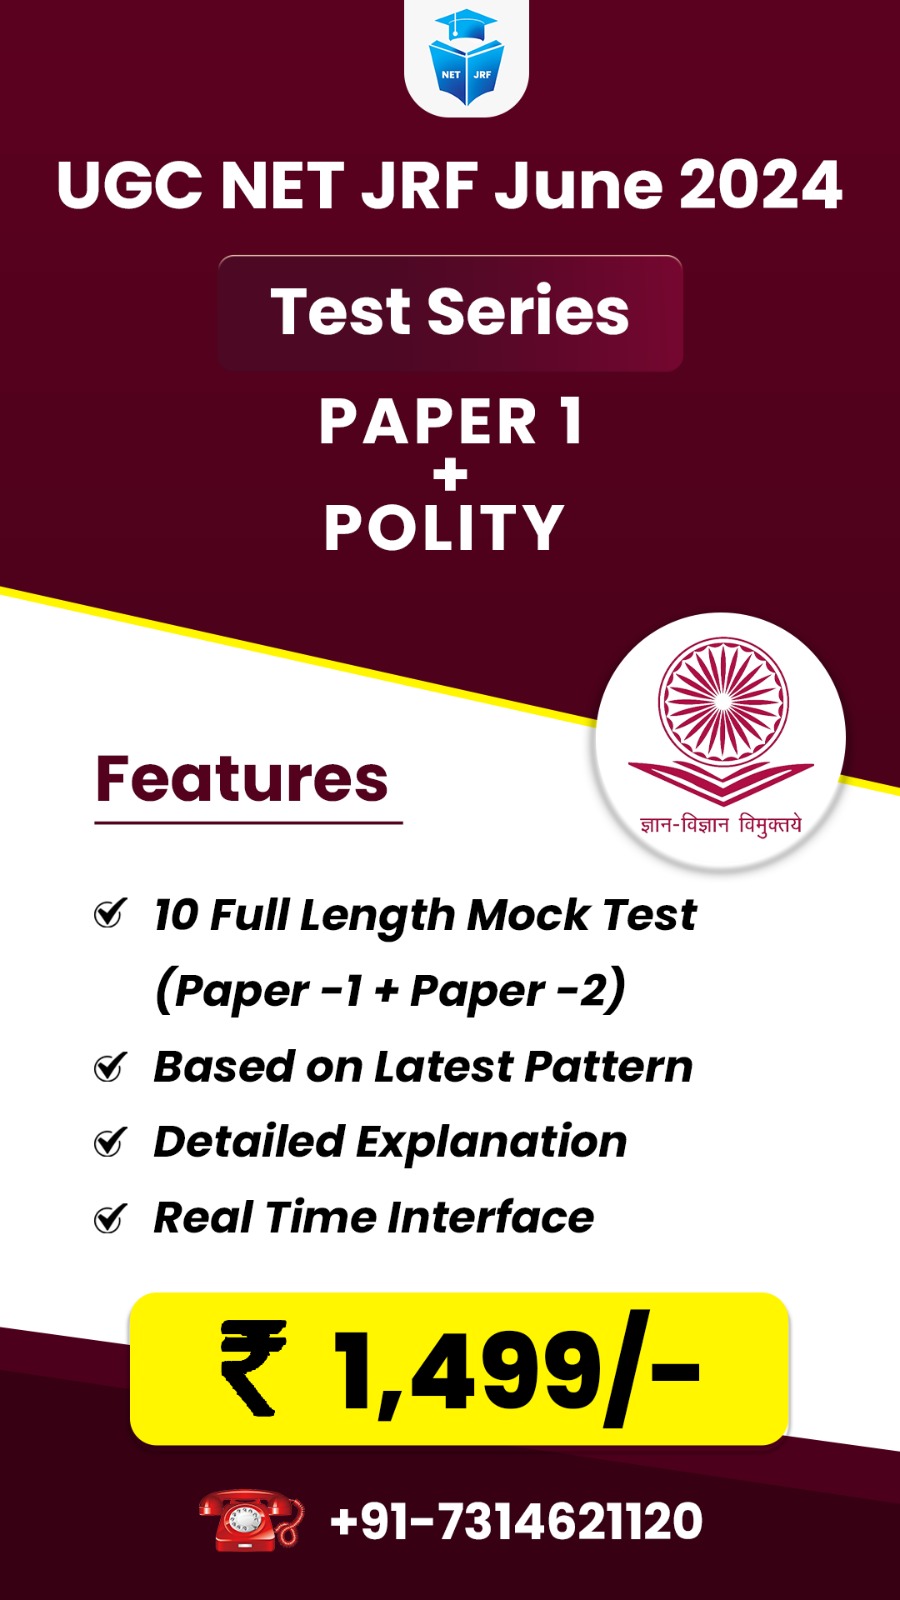 Polity (Paper 1 + Paper 2) Test Series for June 2024